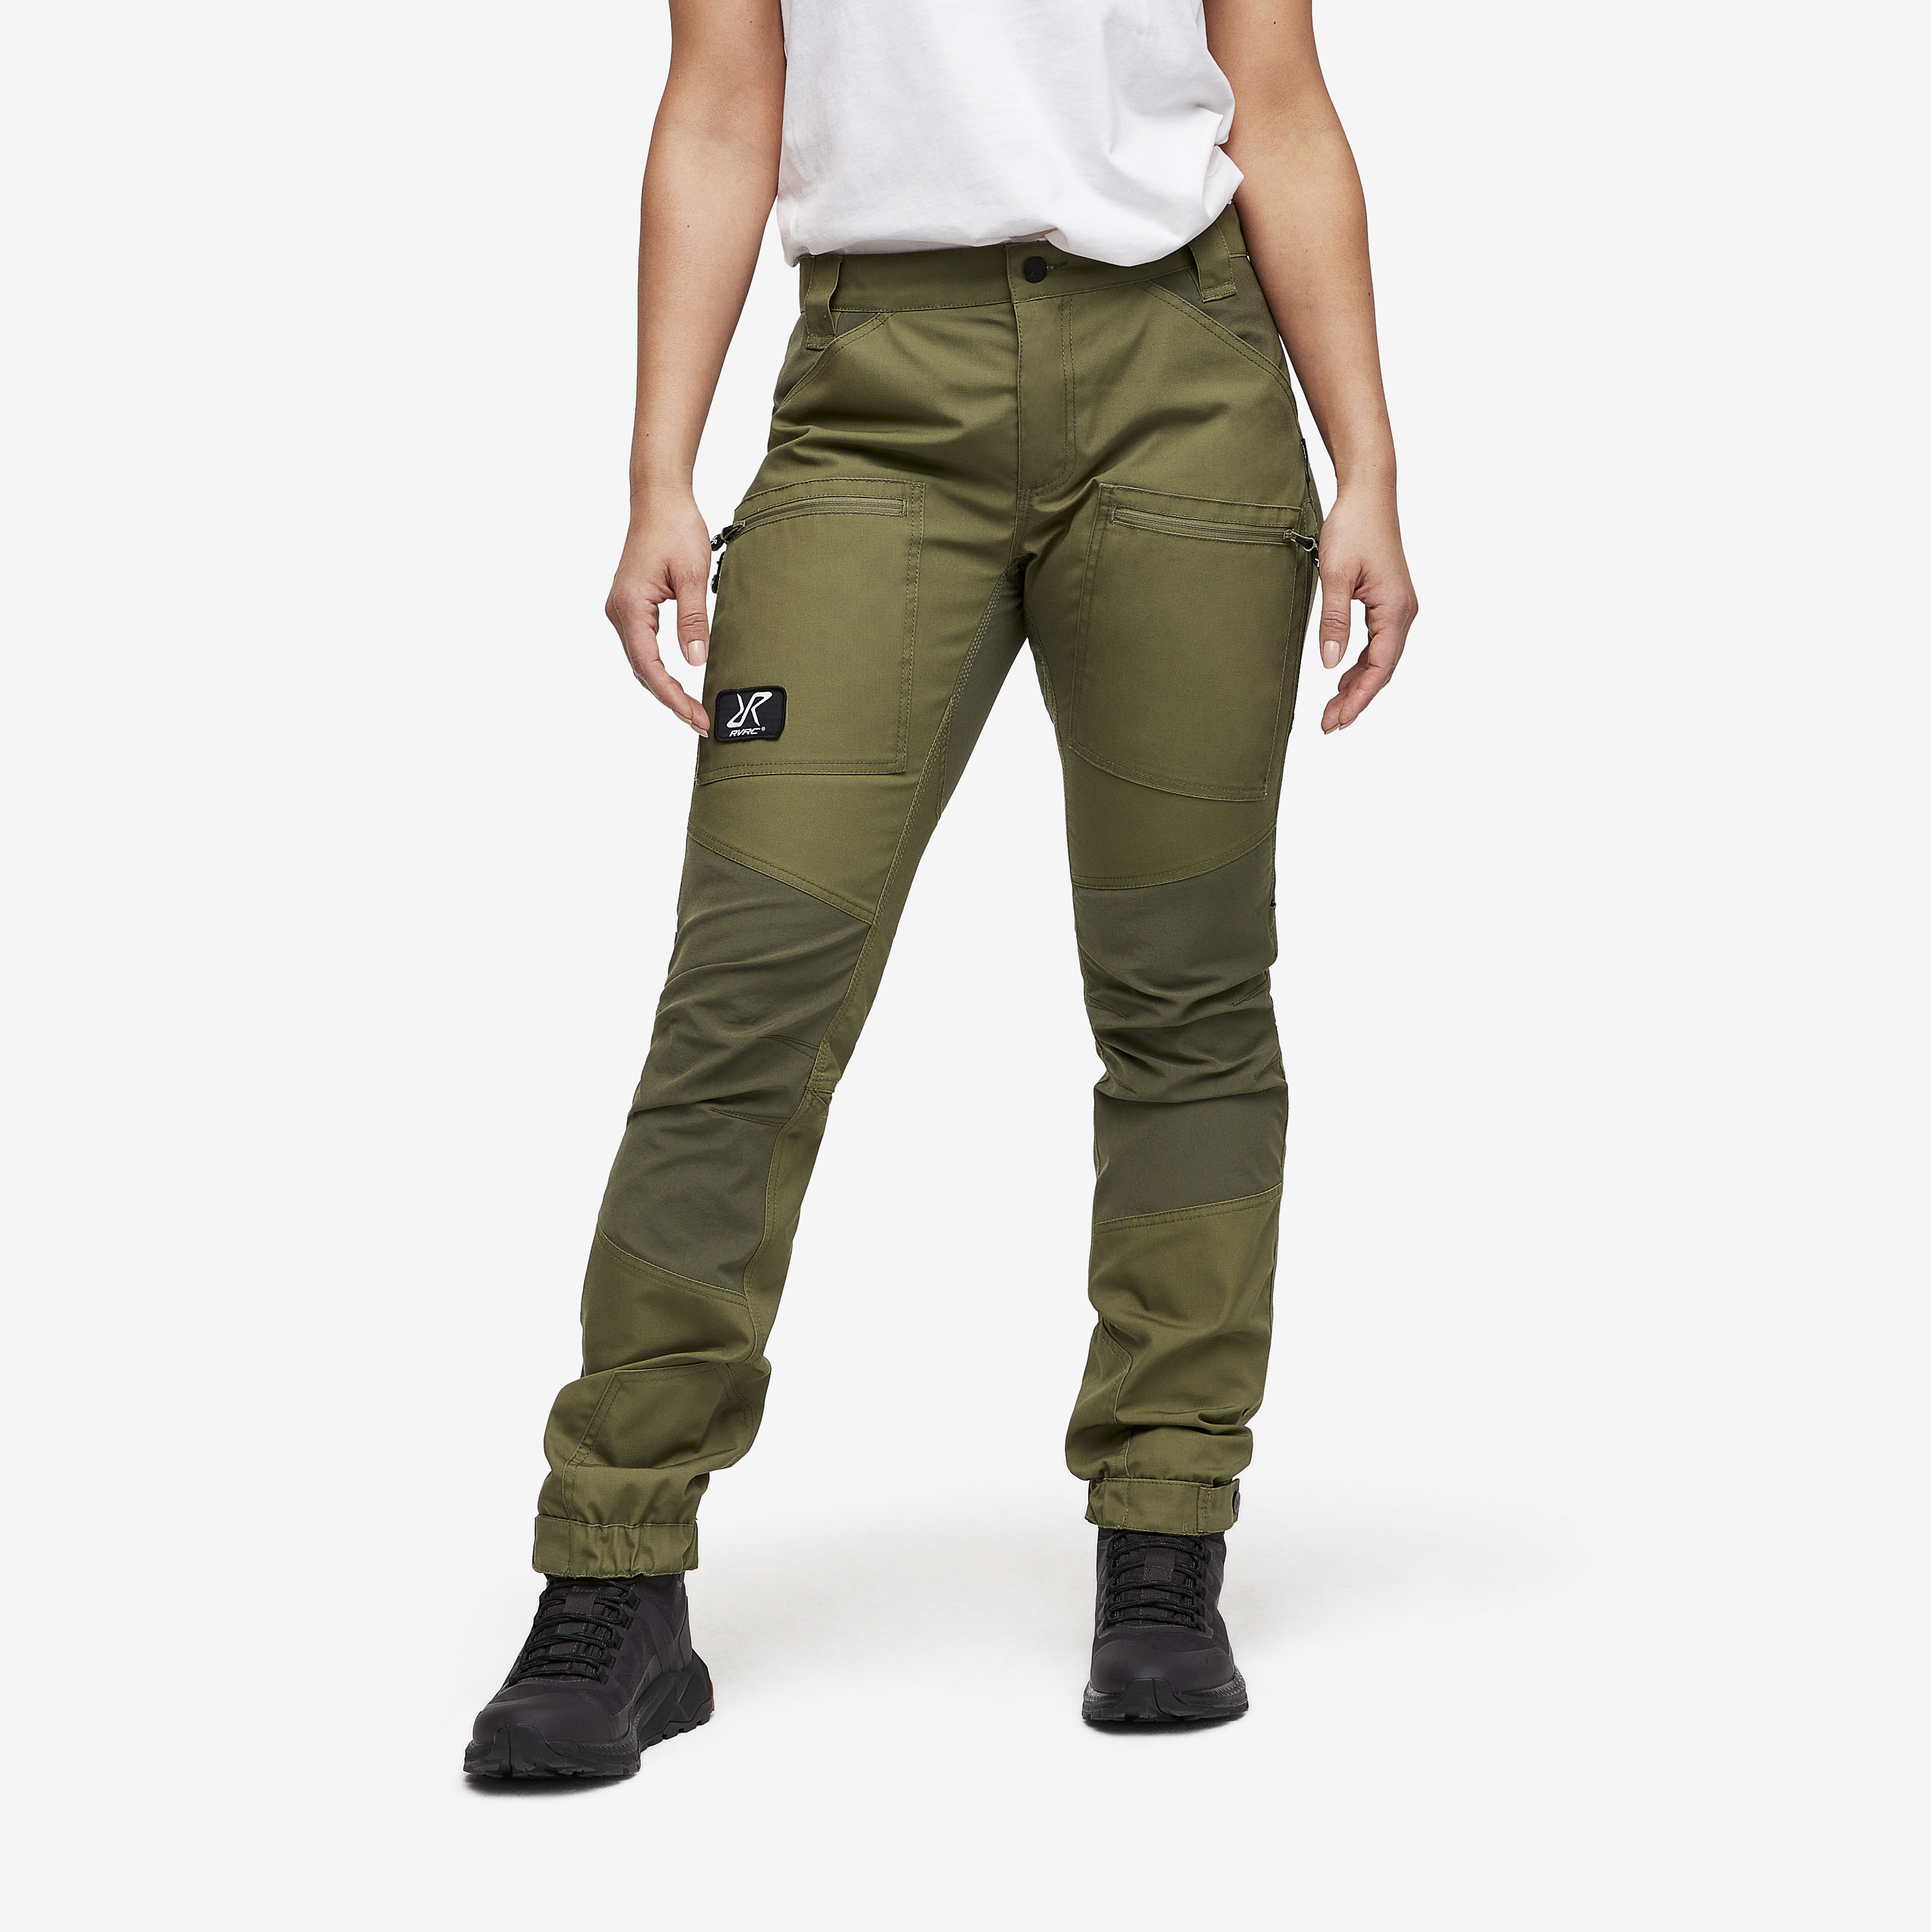 Nordwand Pro Pants Burnt Olive Dame